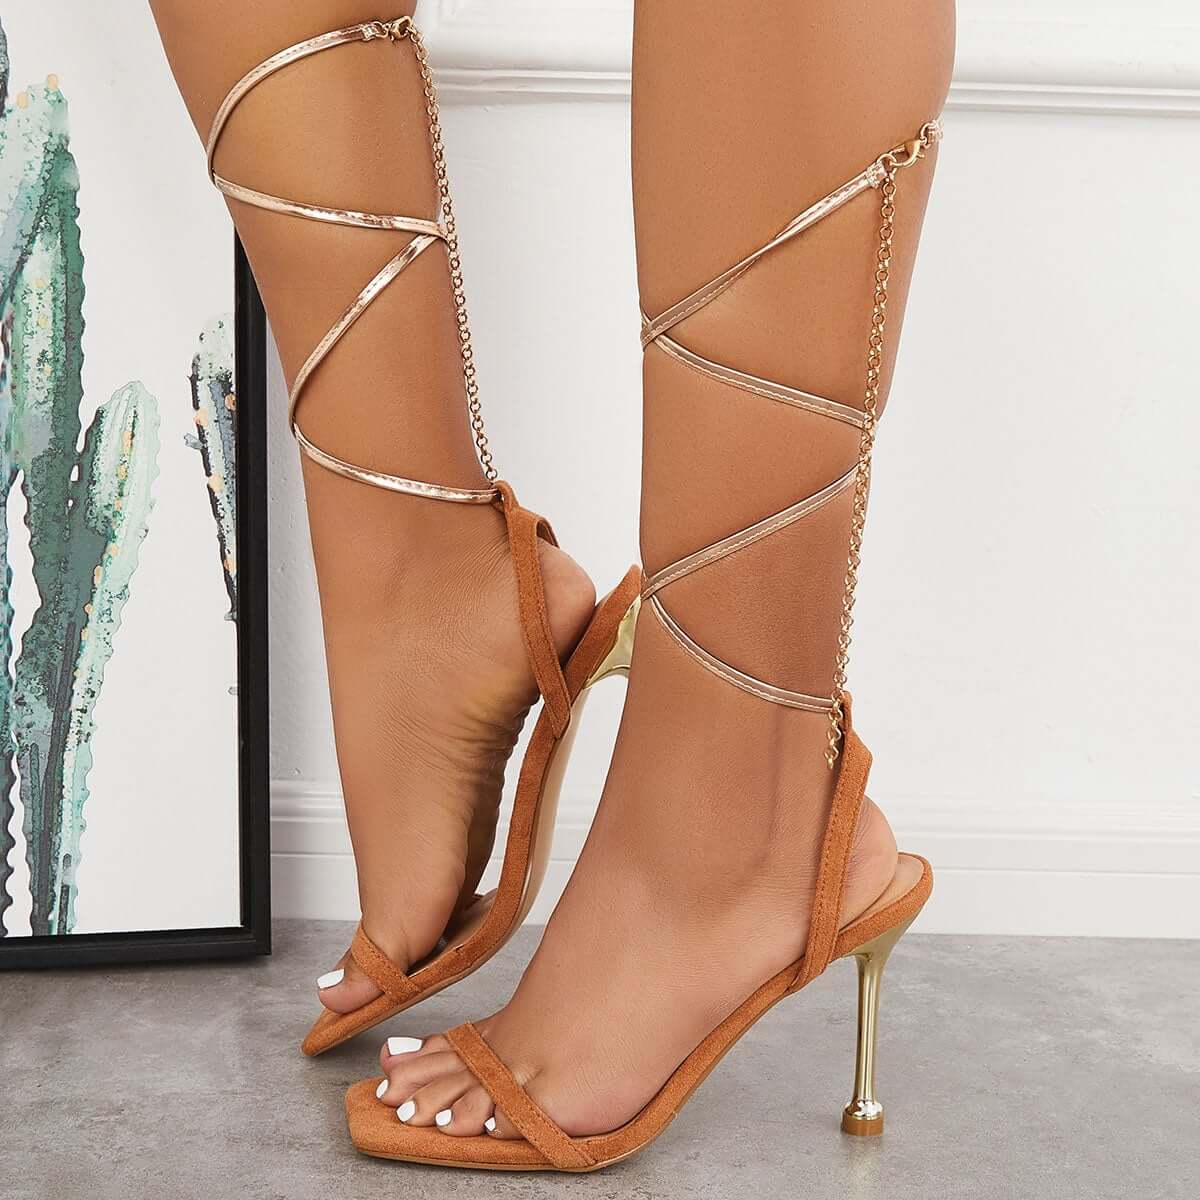 Square Toe Lace Up Stiletto High Heels Tie Strap Gladiator Sandals